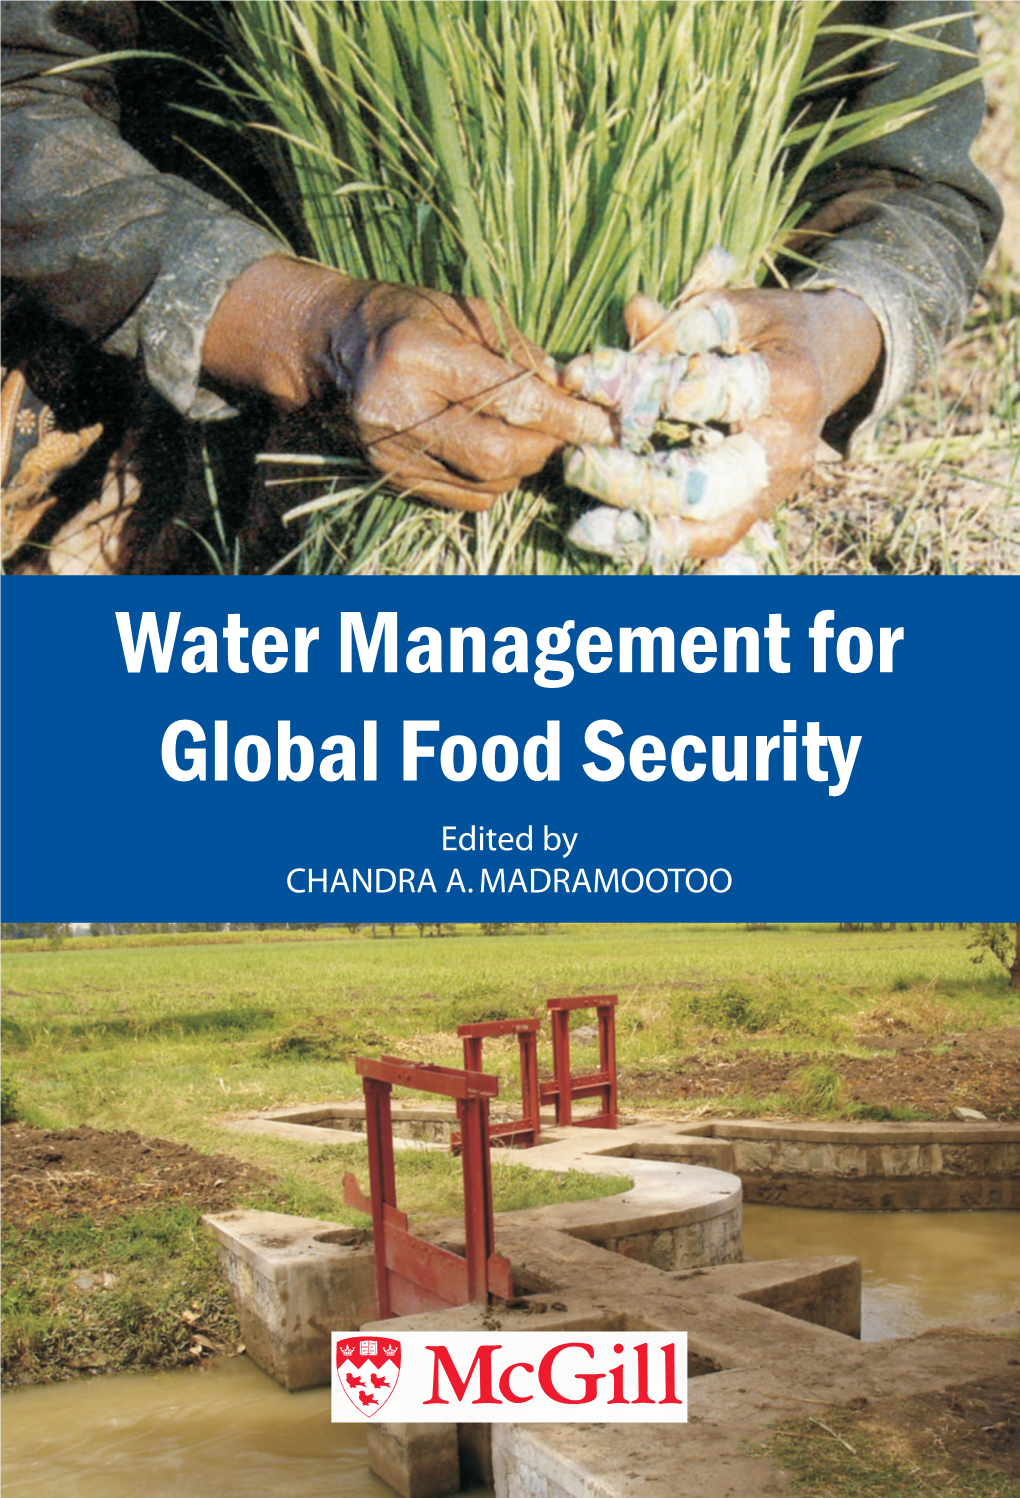 Water Management for Global Food Security